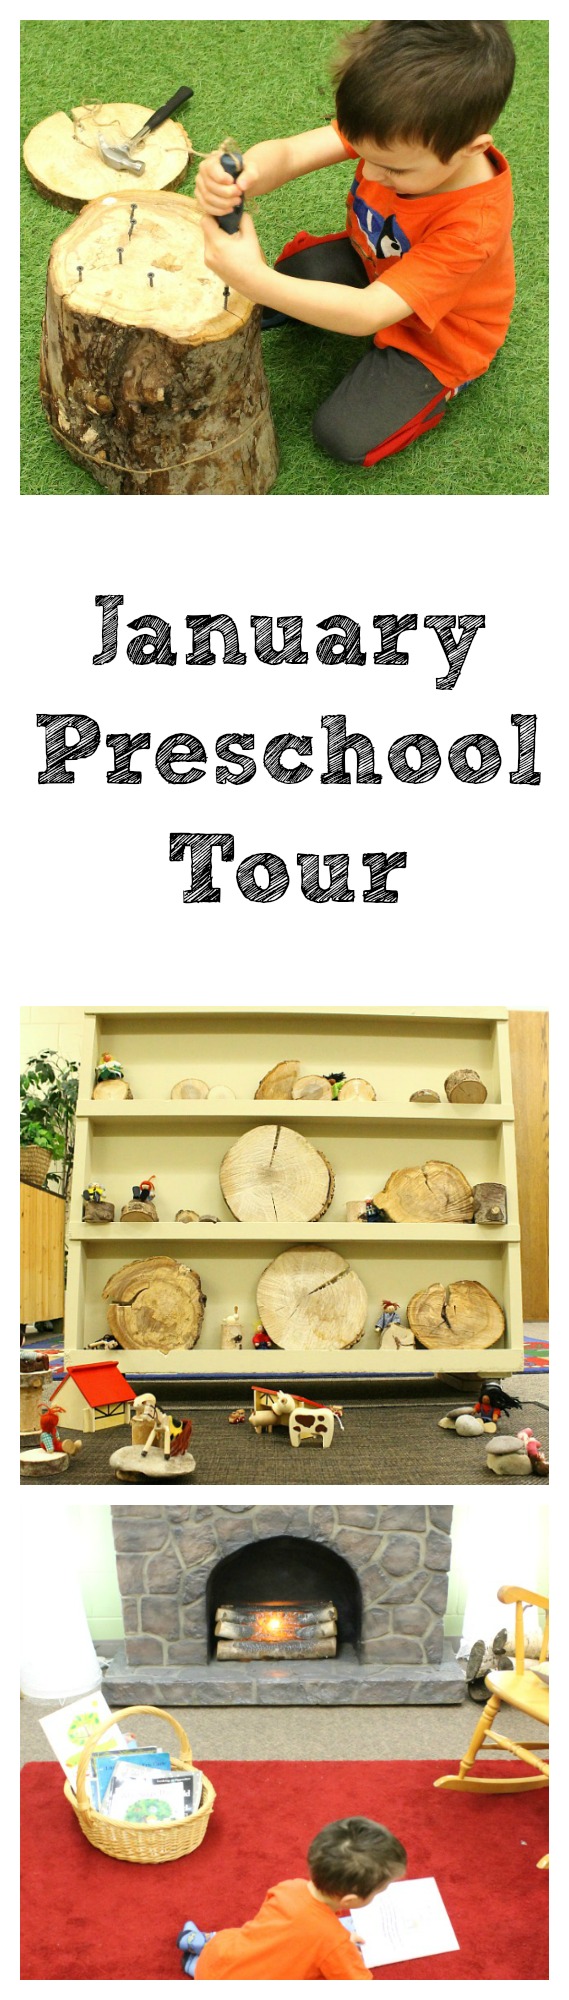 Tour of a preschool classroom - the activities and centers and what the preschoolers are learning at each one!